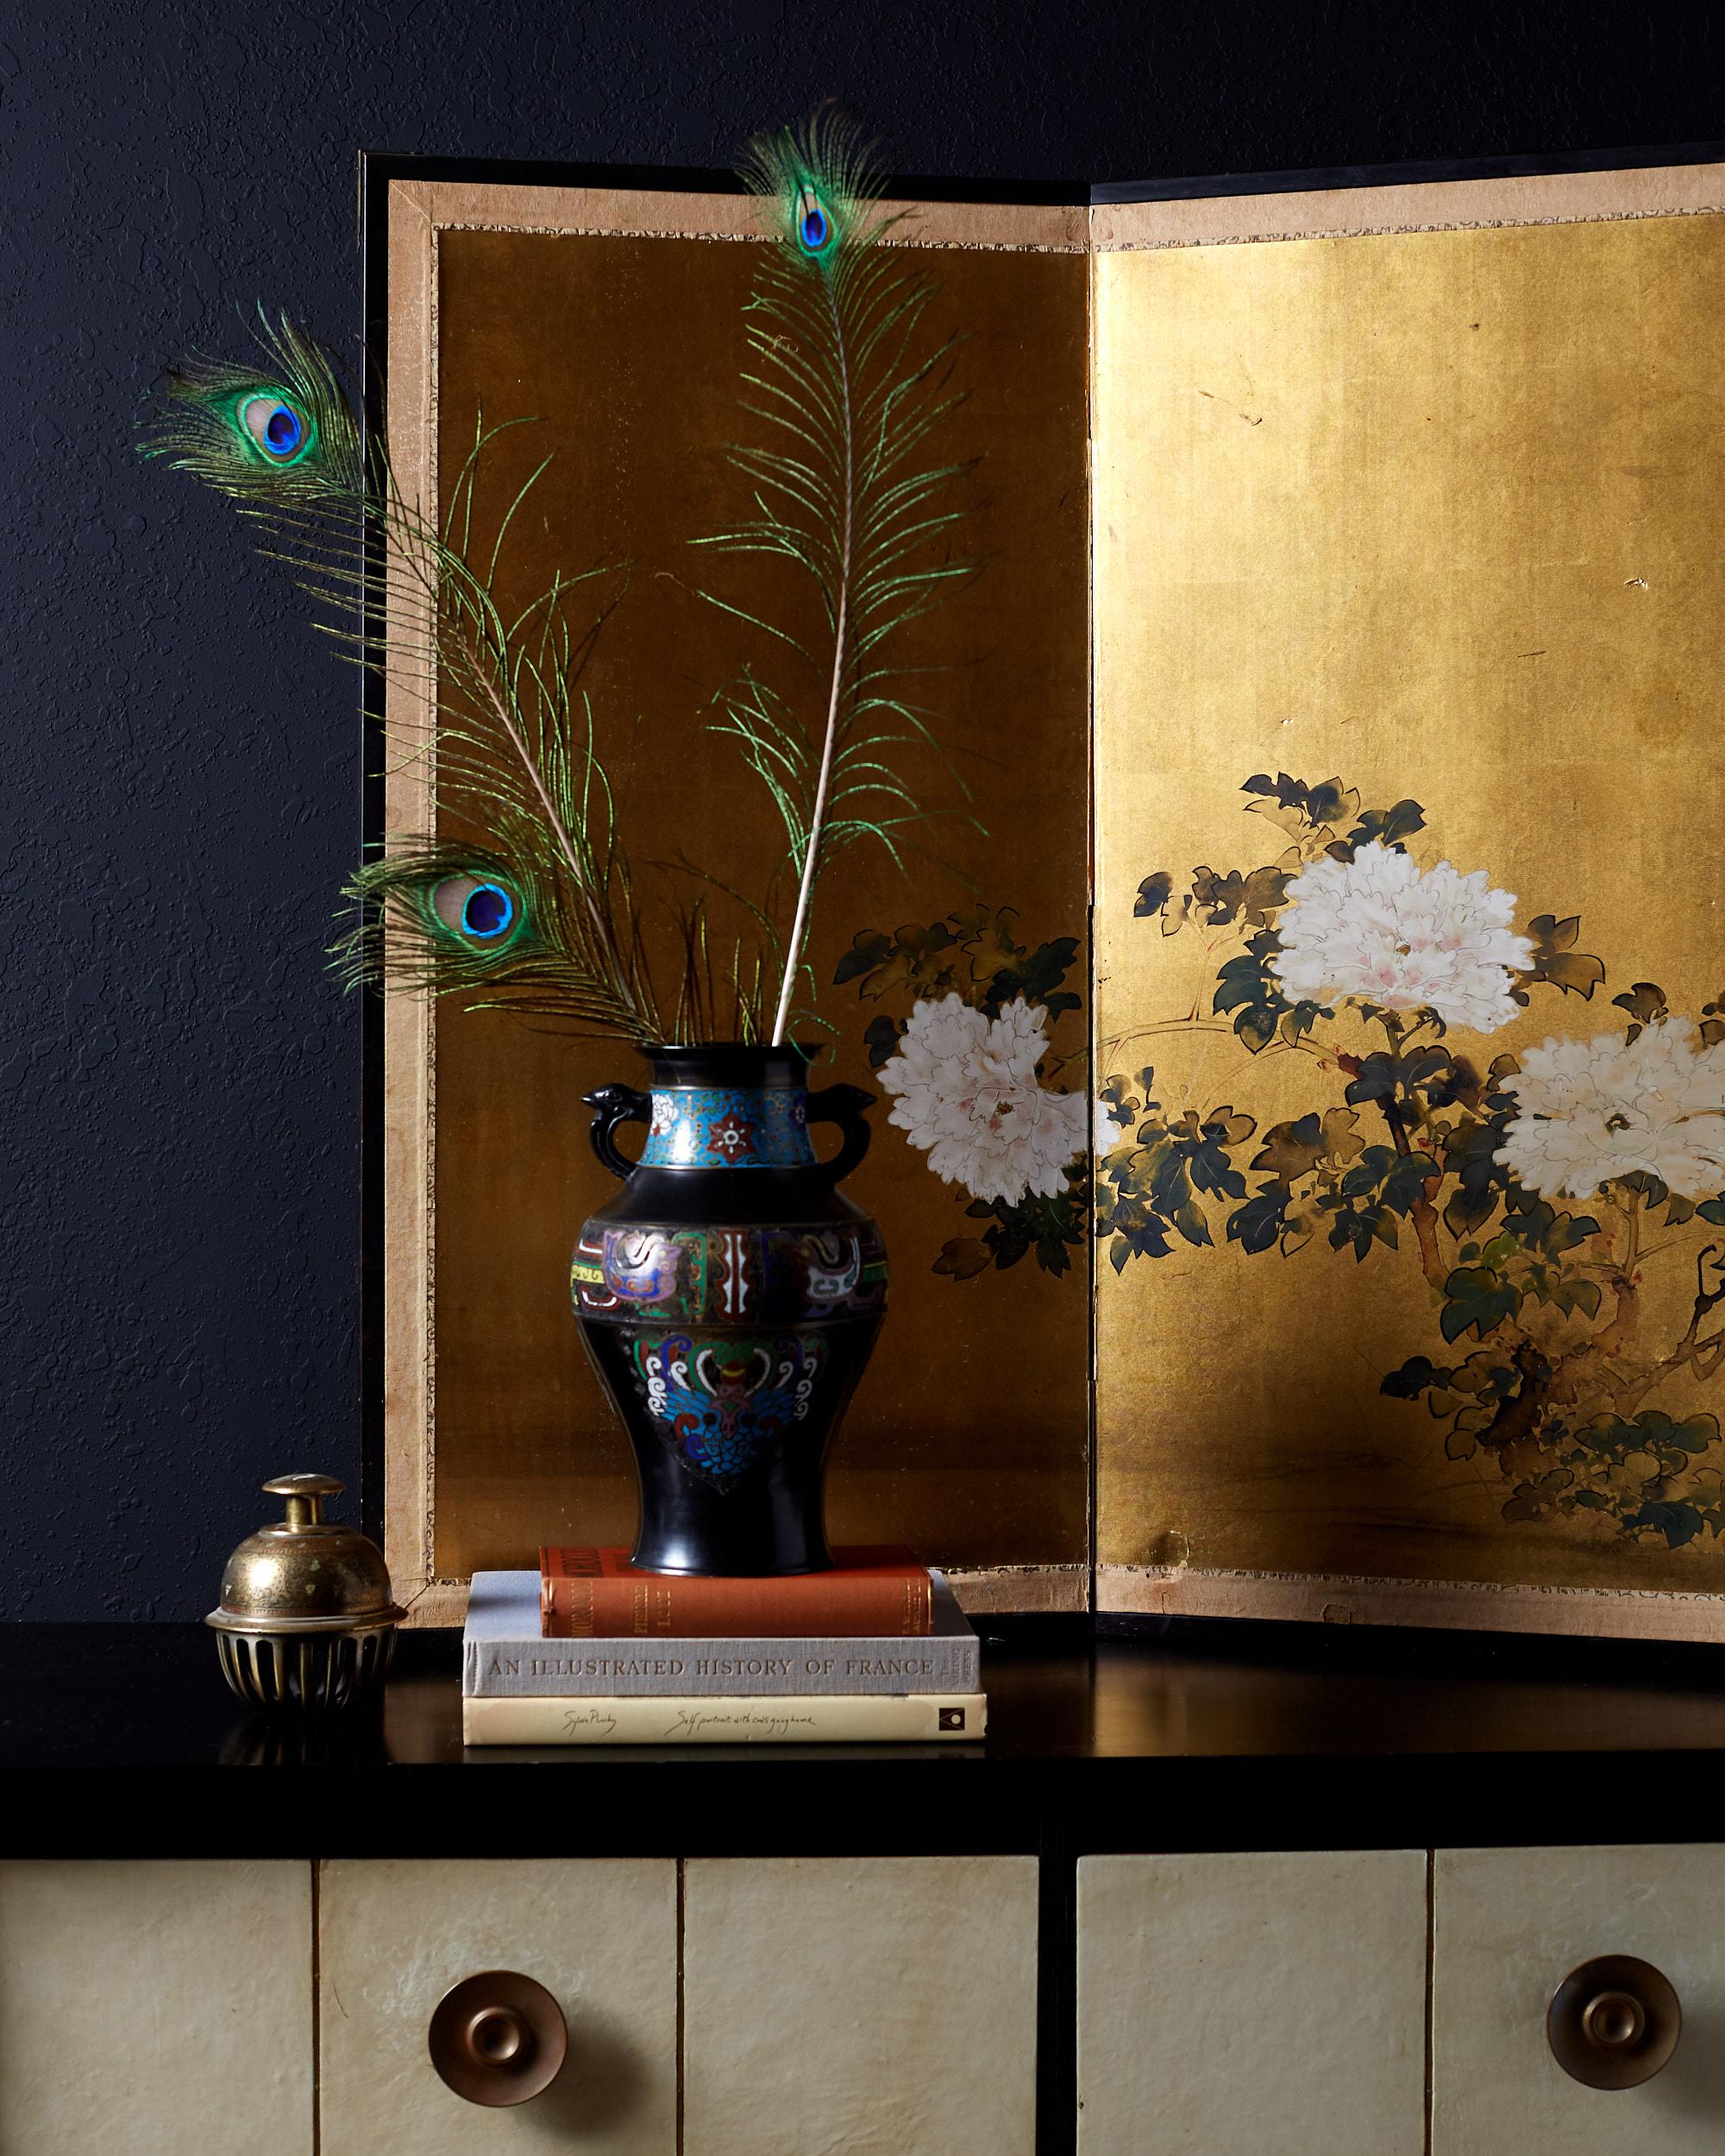 Gorgeous Japanese Showa period four-panel byobu screen of white peonies. Elegantly painted on squares of gold leaf with a beautiful vintage patina. The screen has minor losses on the front panels, but shows beautifully laid flat or mounted on a